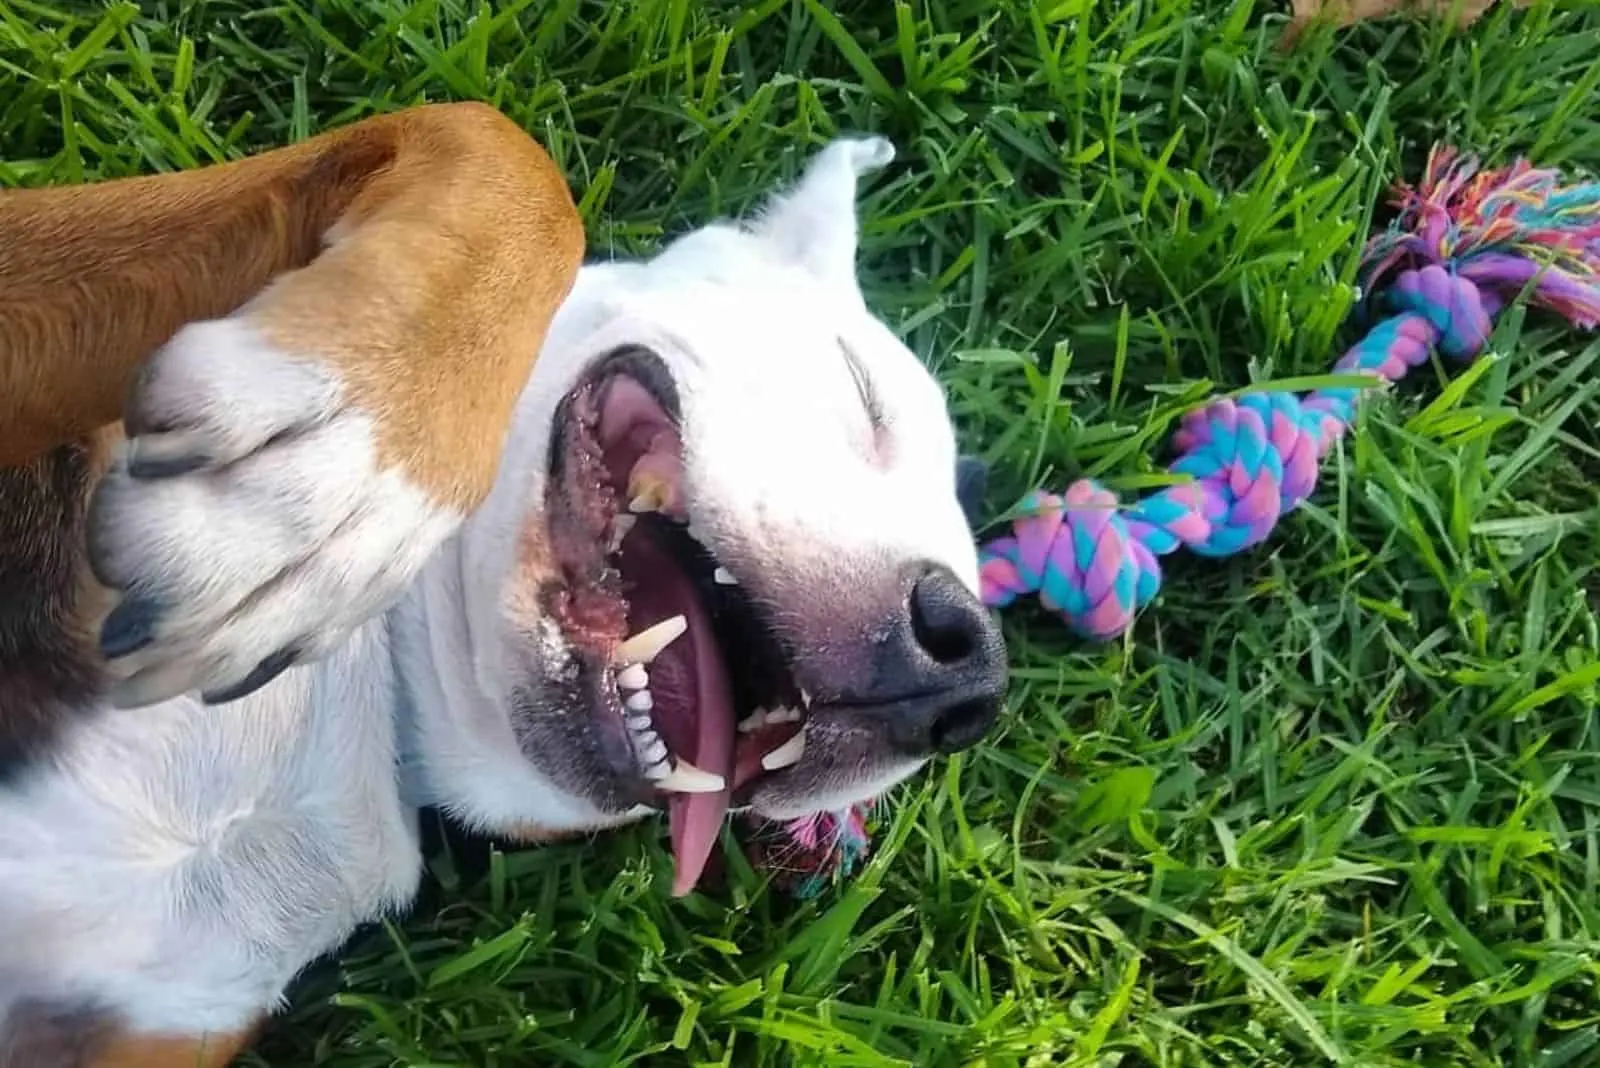 the dog is having fun in the grass with his toy